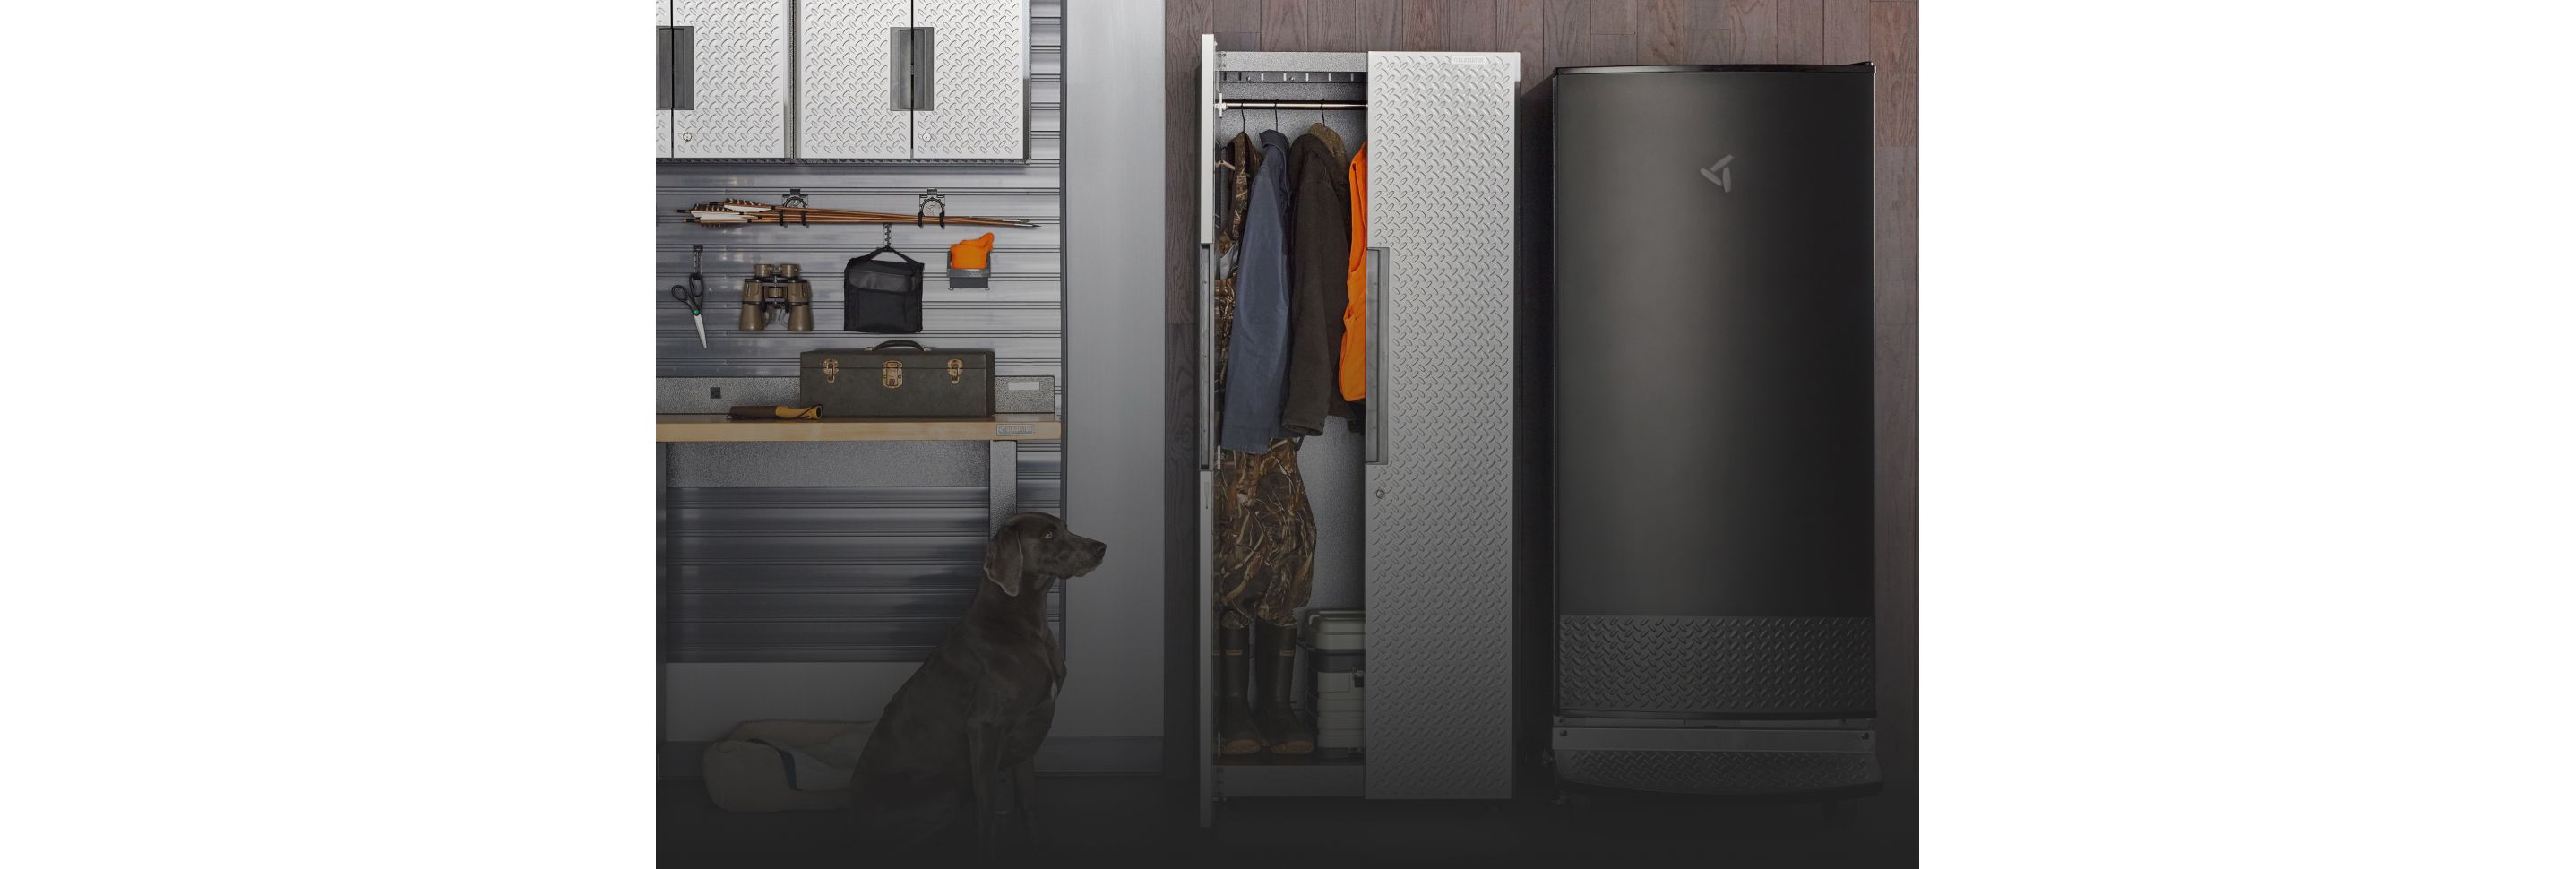 A garage with a sitting dog. A Gladiator Cabinet with one door opened. Inside are hanging jackets. Next to the cabinet is a Gladiator Garage Refrigerator